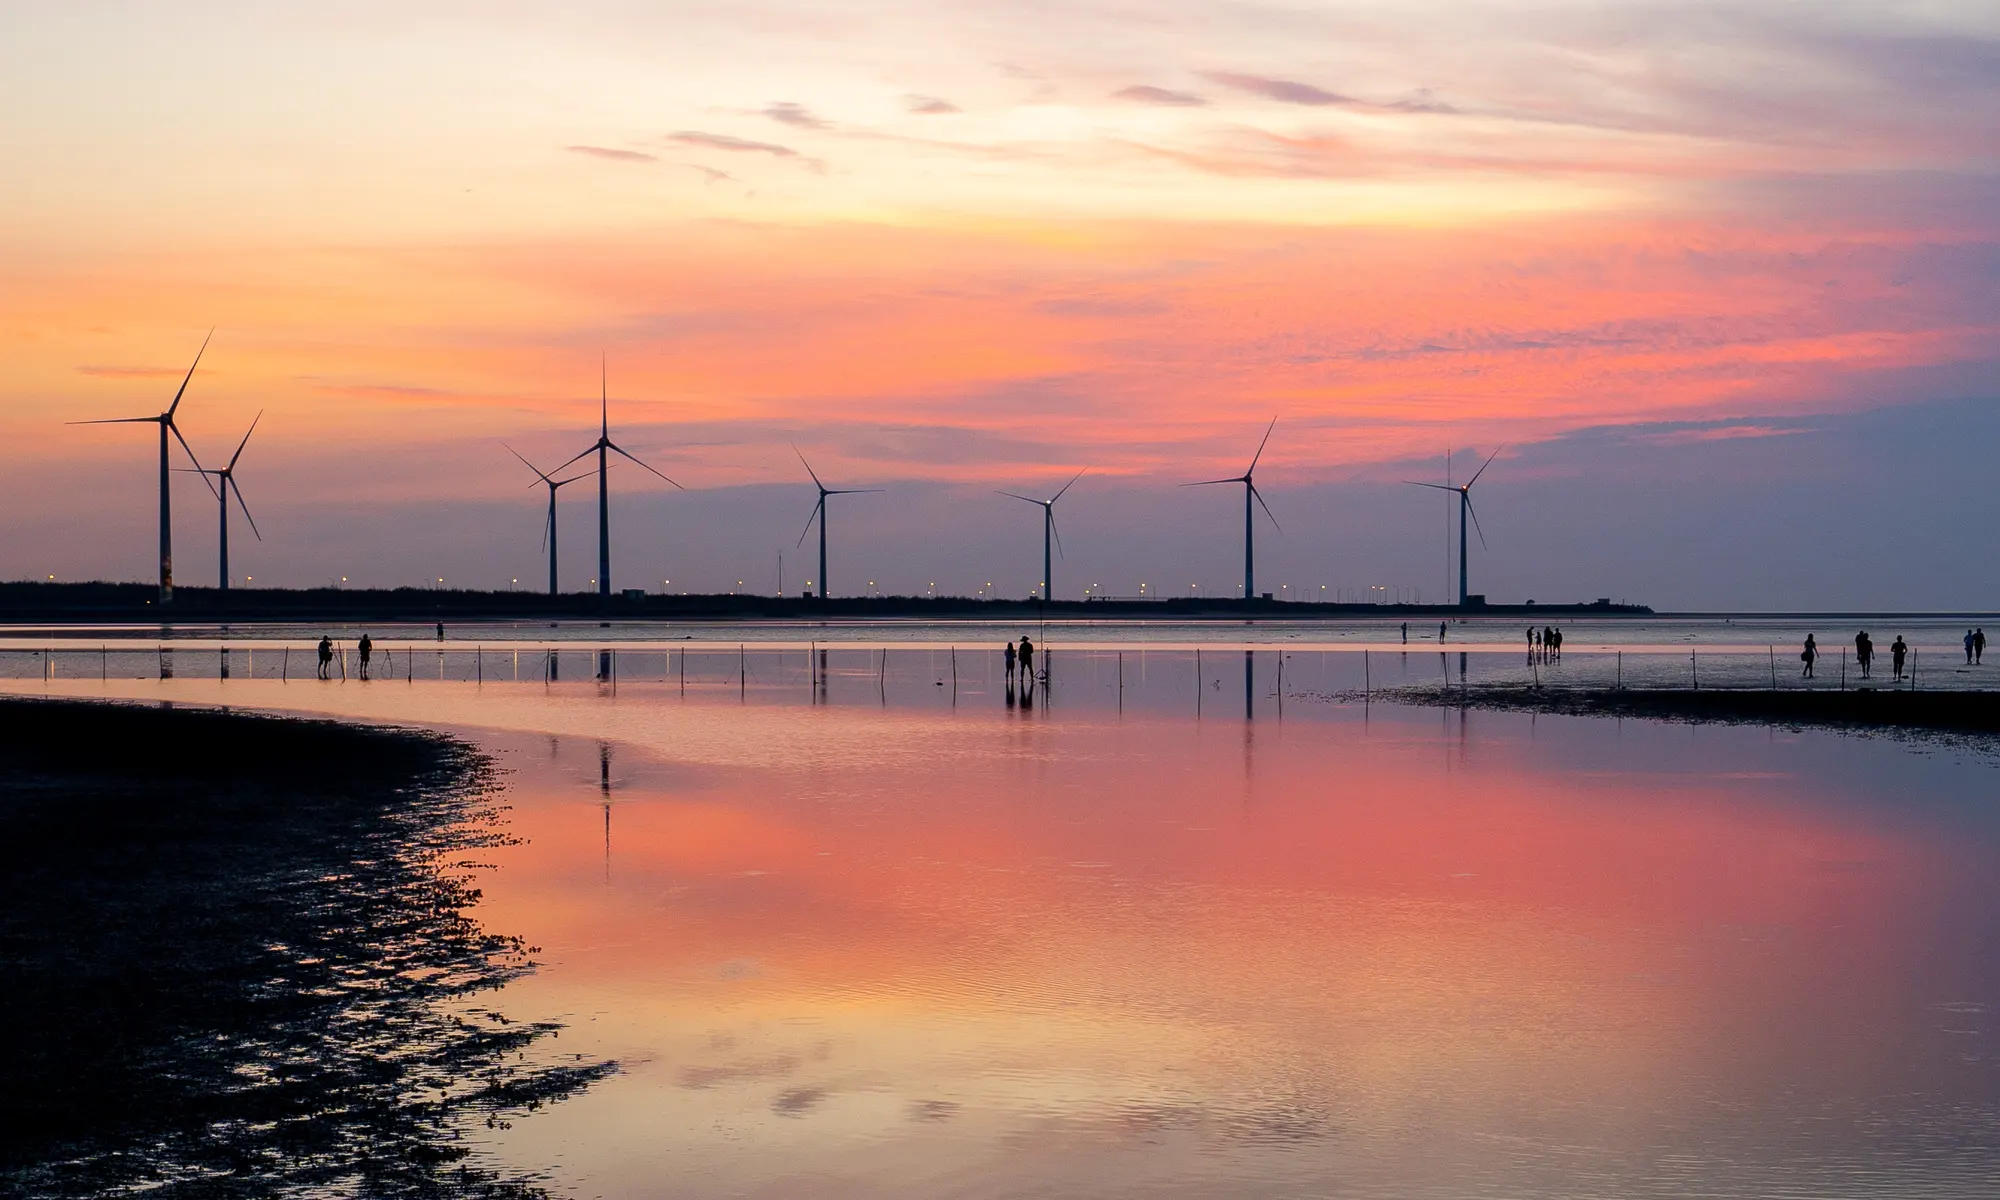 The sunset glow can be seen above the tidal flats of Gaomei Wetlands.